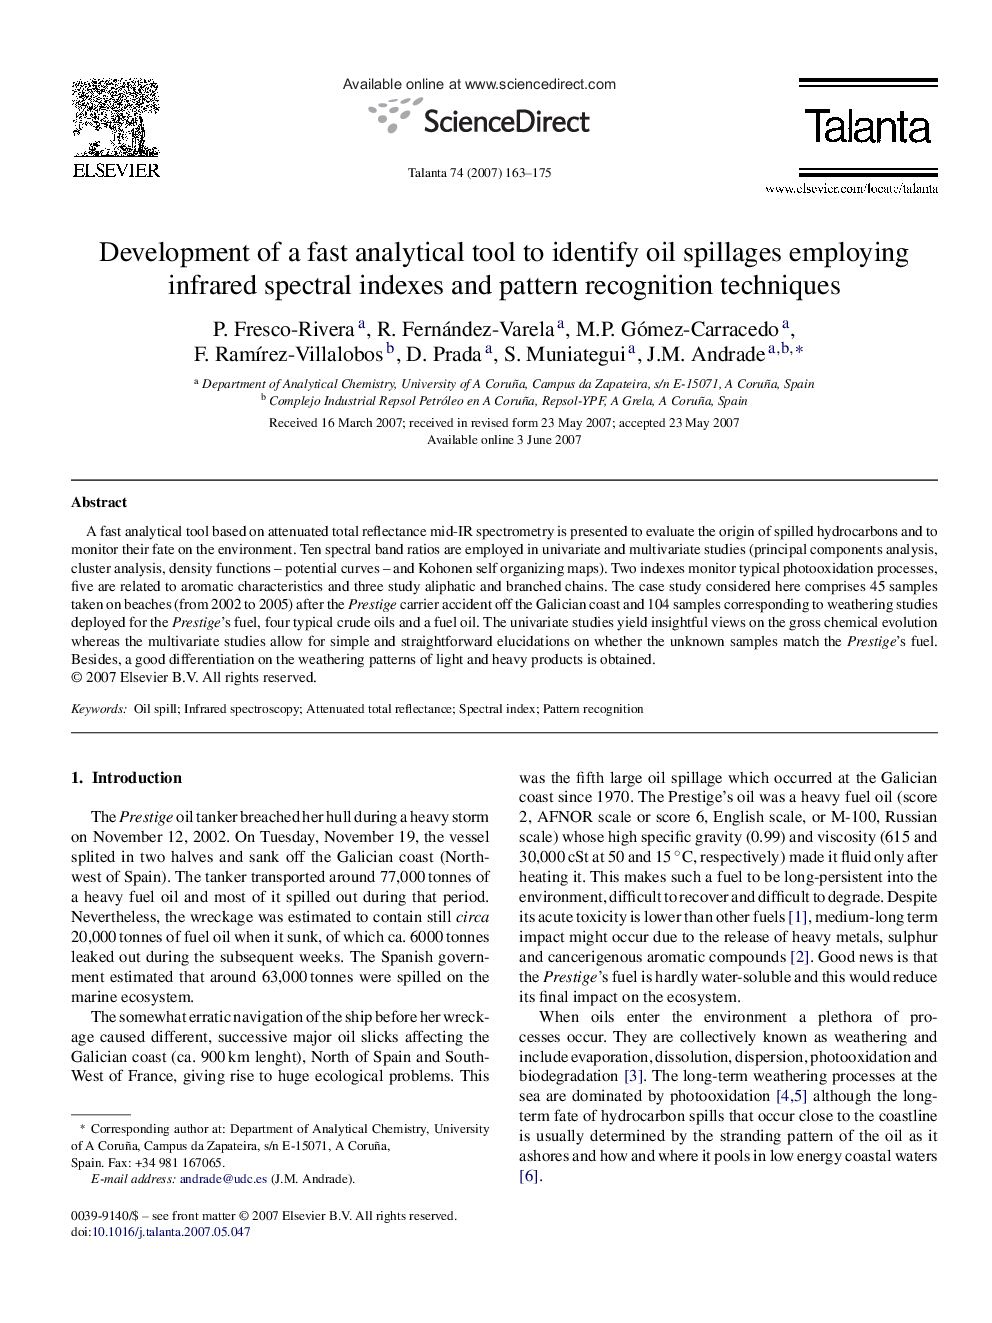 Development of a fast analytical tool to identify oil spillages employing infrared spectral indexes and pattern recognition techniques